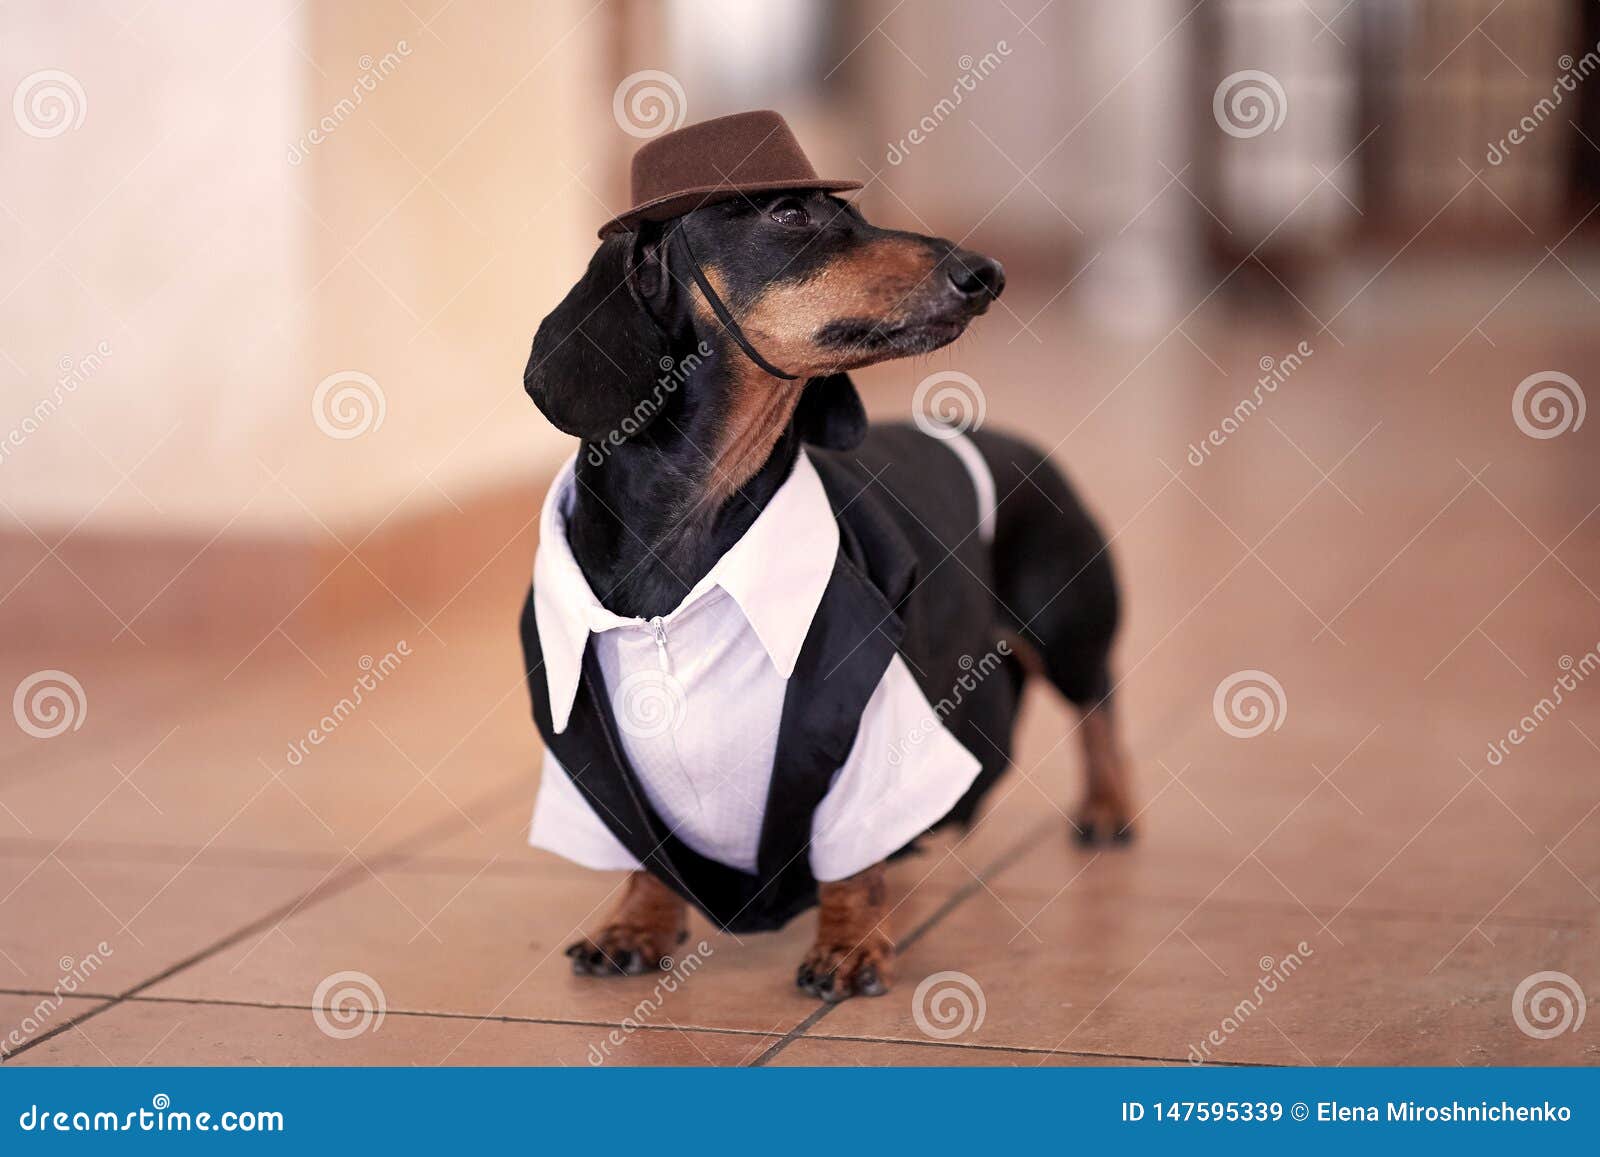 Sweet Black and Tan Duchshund Dog Wearing Black Tuxedo and Brown Hat.  Clever and Attentive Look Stock Image - Image of clothes, leash: 147595339